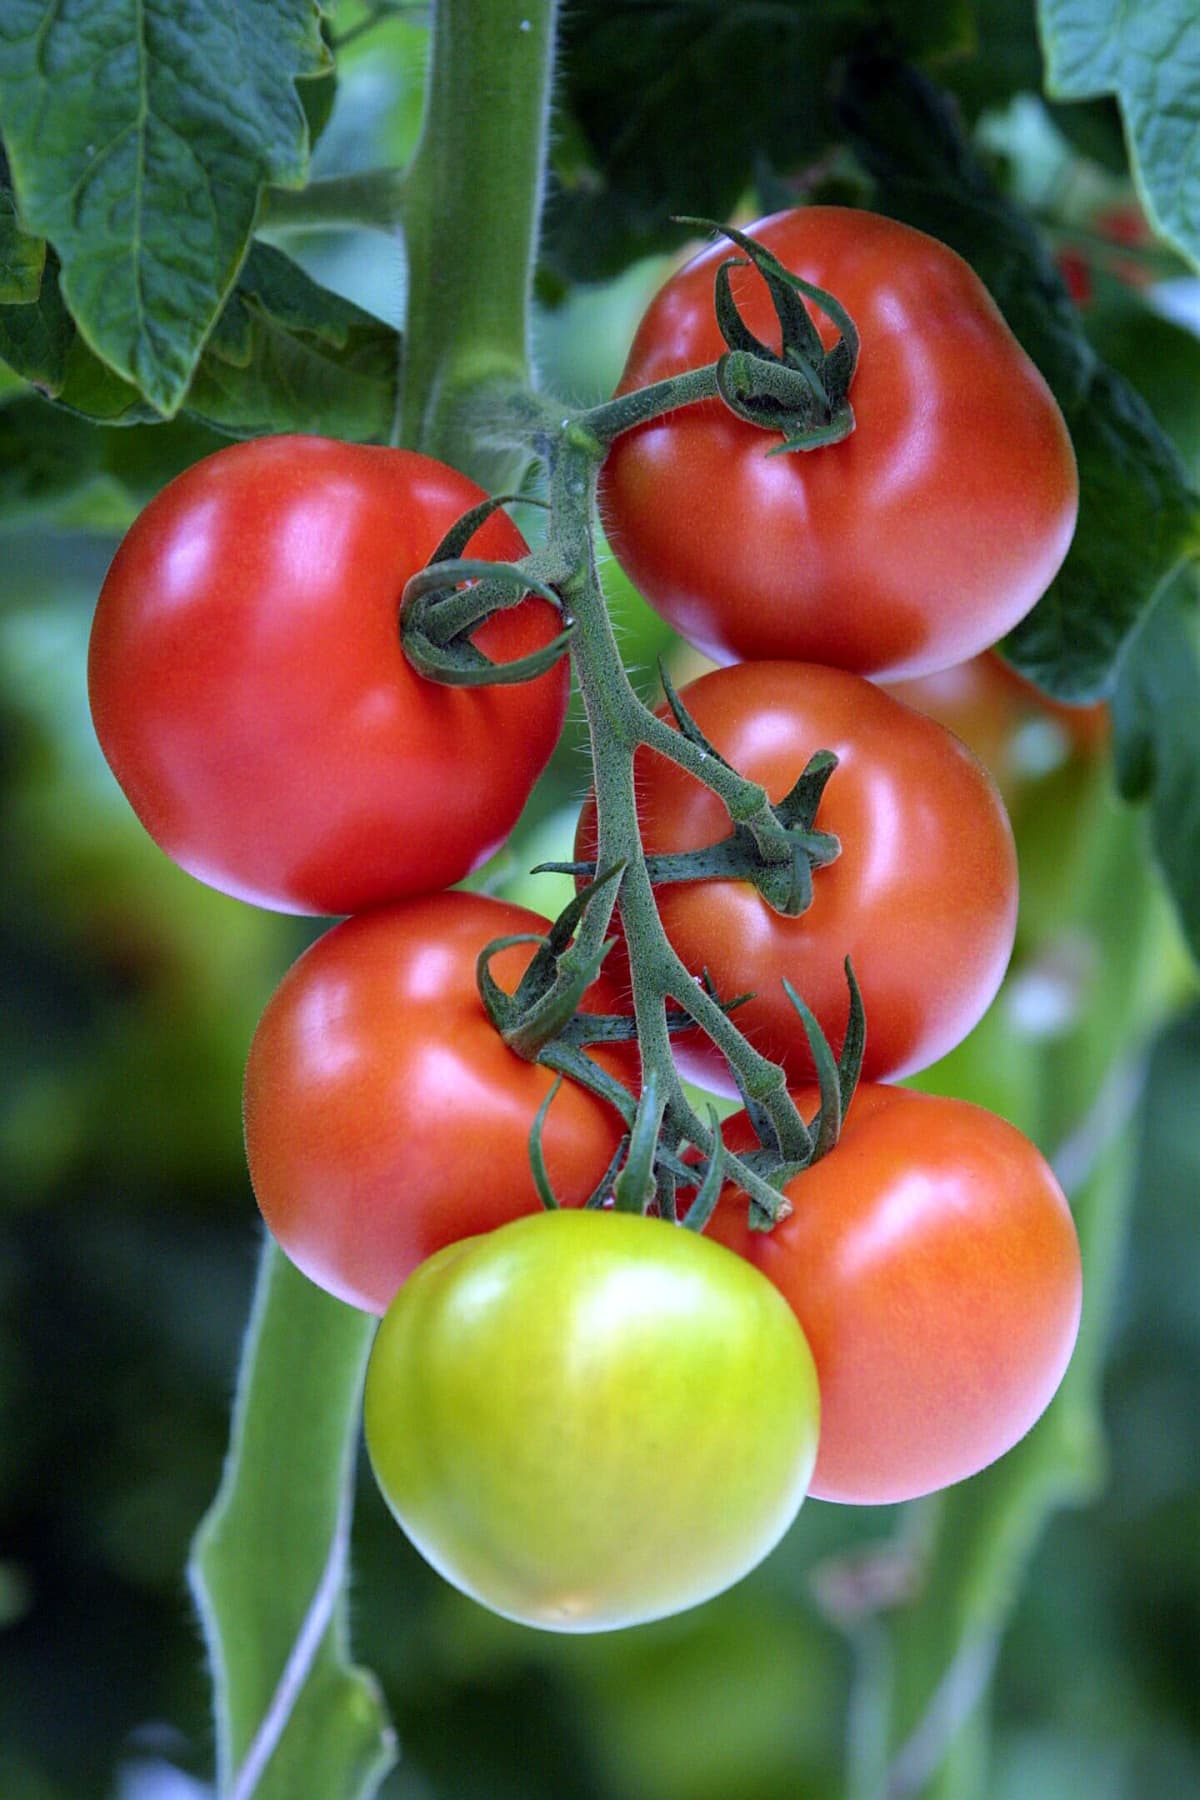 AUCKLAND, NEW ZEALAND - JANUARY 04:  Stock shot of Tomatoes on the plant in a local hot house.  (Photo by Michael Bradley/Getty Images)